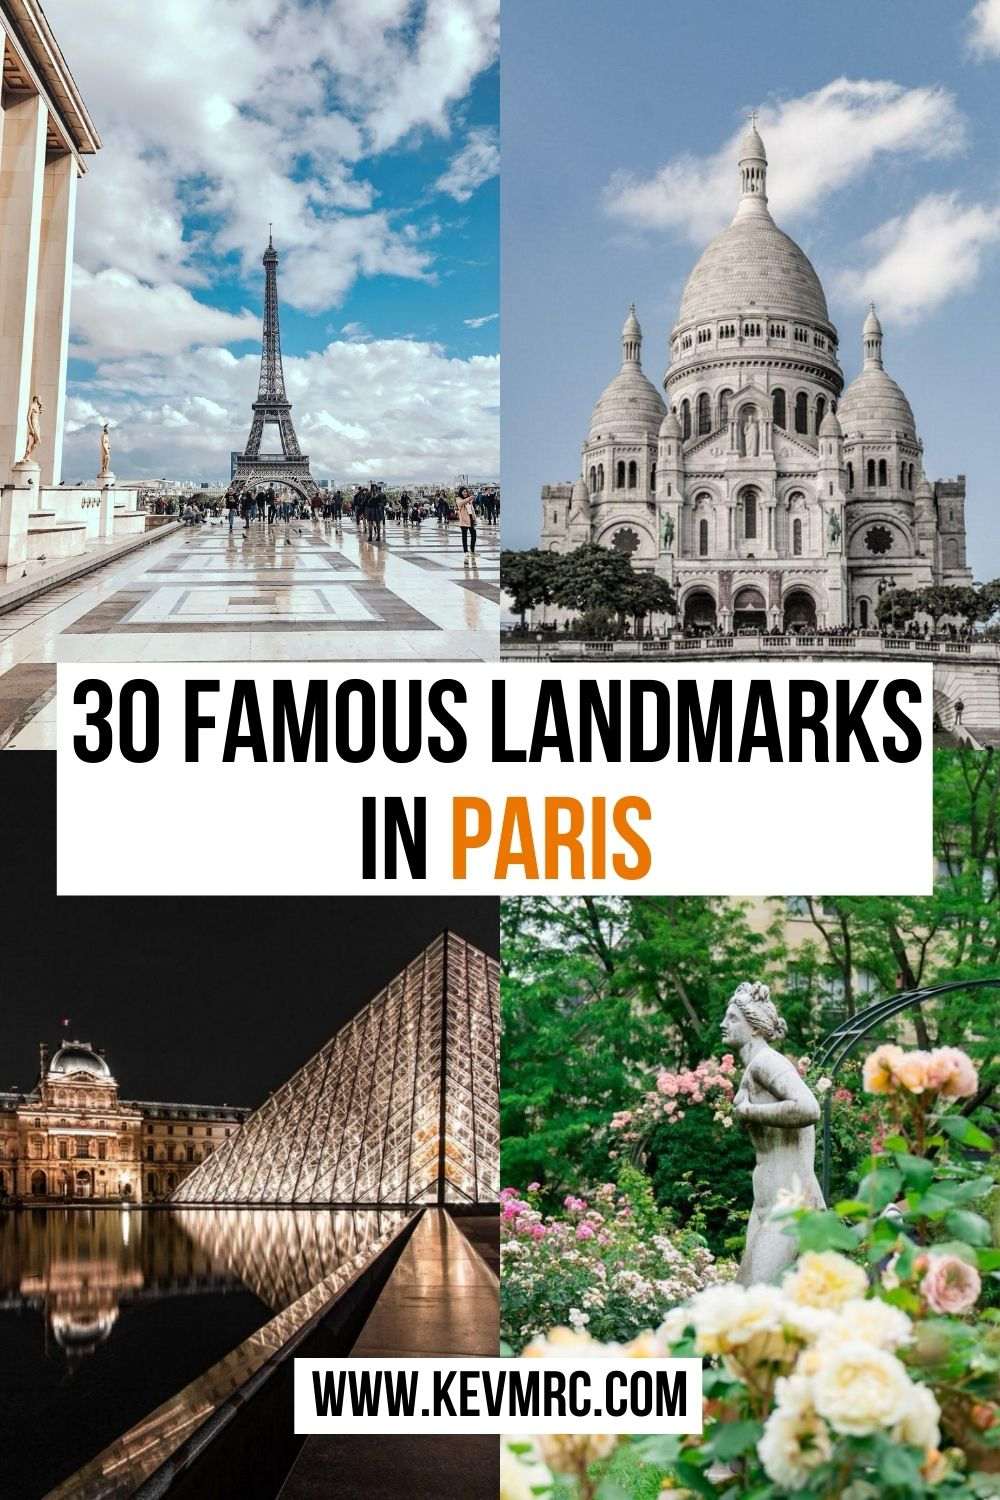 Paris, the capital of love, is a city that must be seen at least once in a lifetime. With its incredibly rich historical and cultural heritage, the capital of France is one of the most visited cities in the world, and for good reason. Here's a selection of 30 famous landmarks in Paris France. paris landmarks | france landmarks | paris things to see | paris travel | places to visit in paris